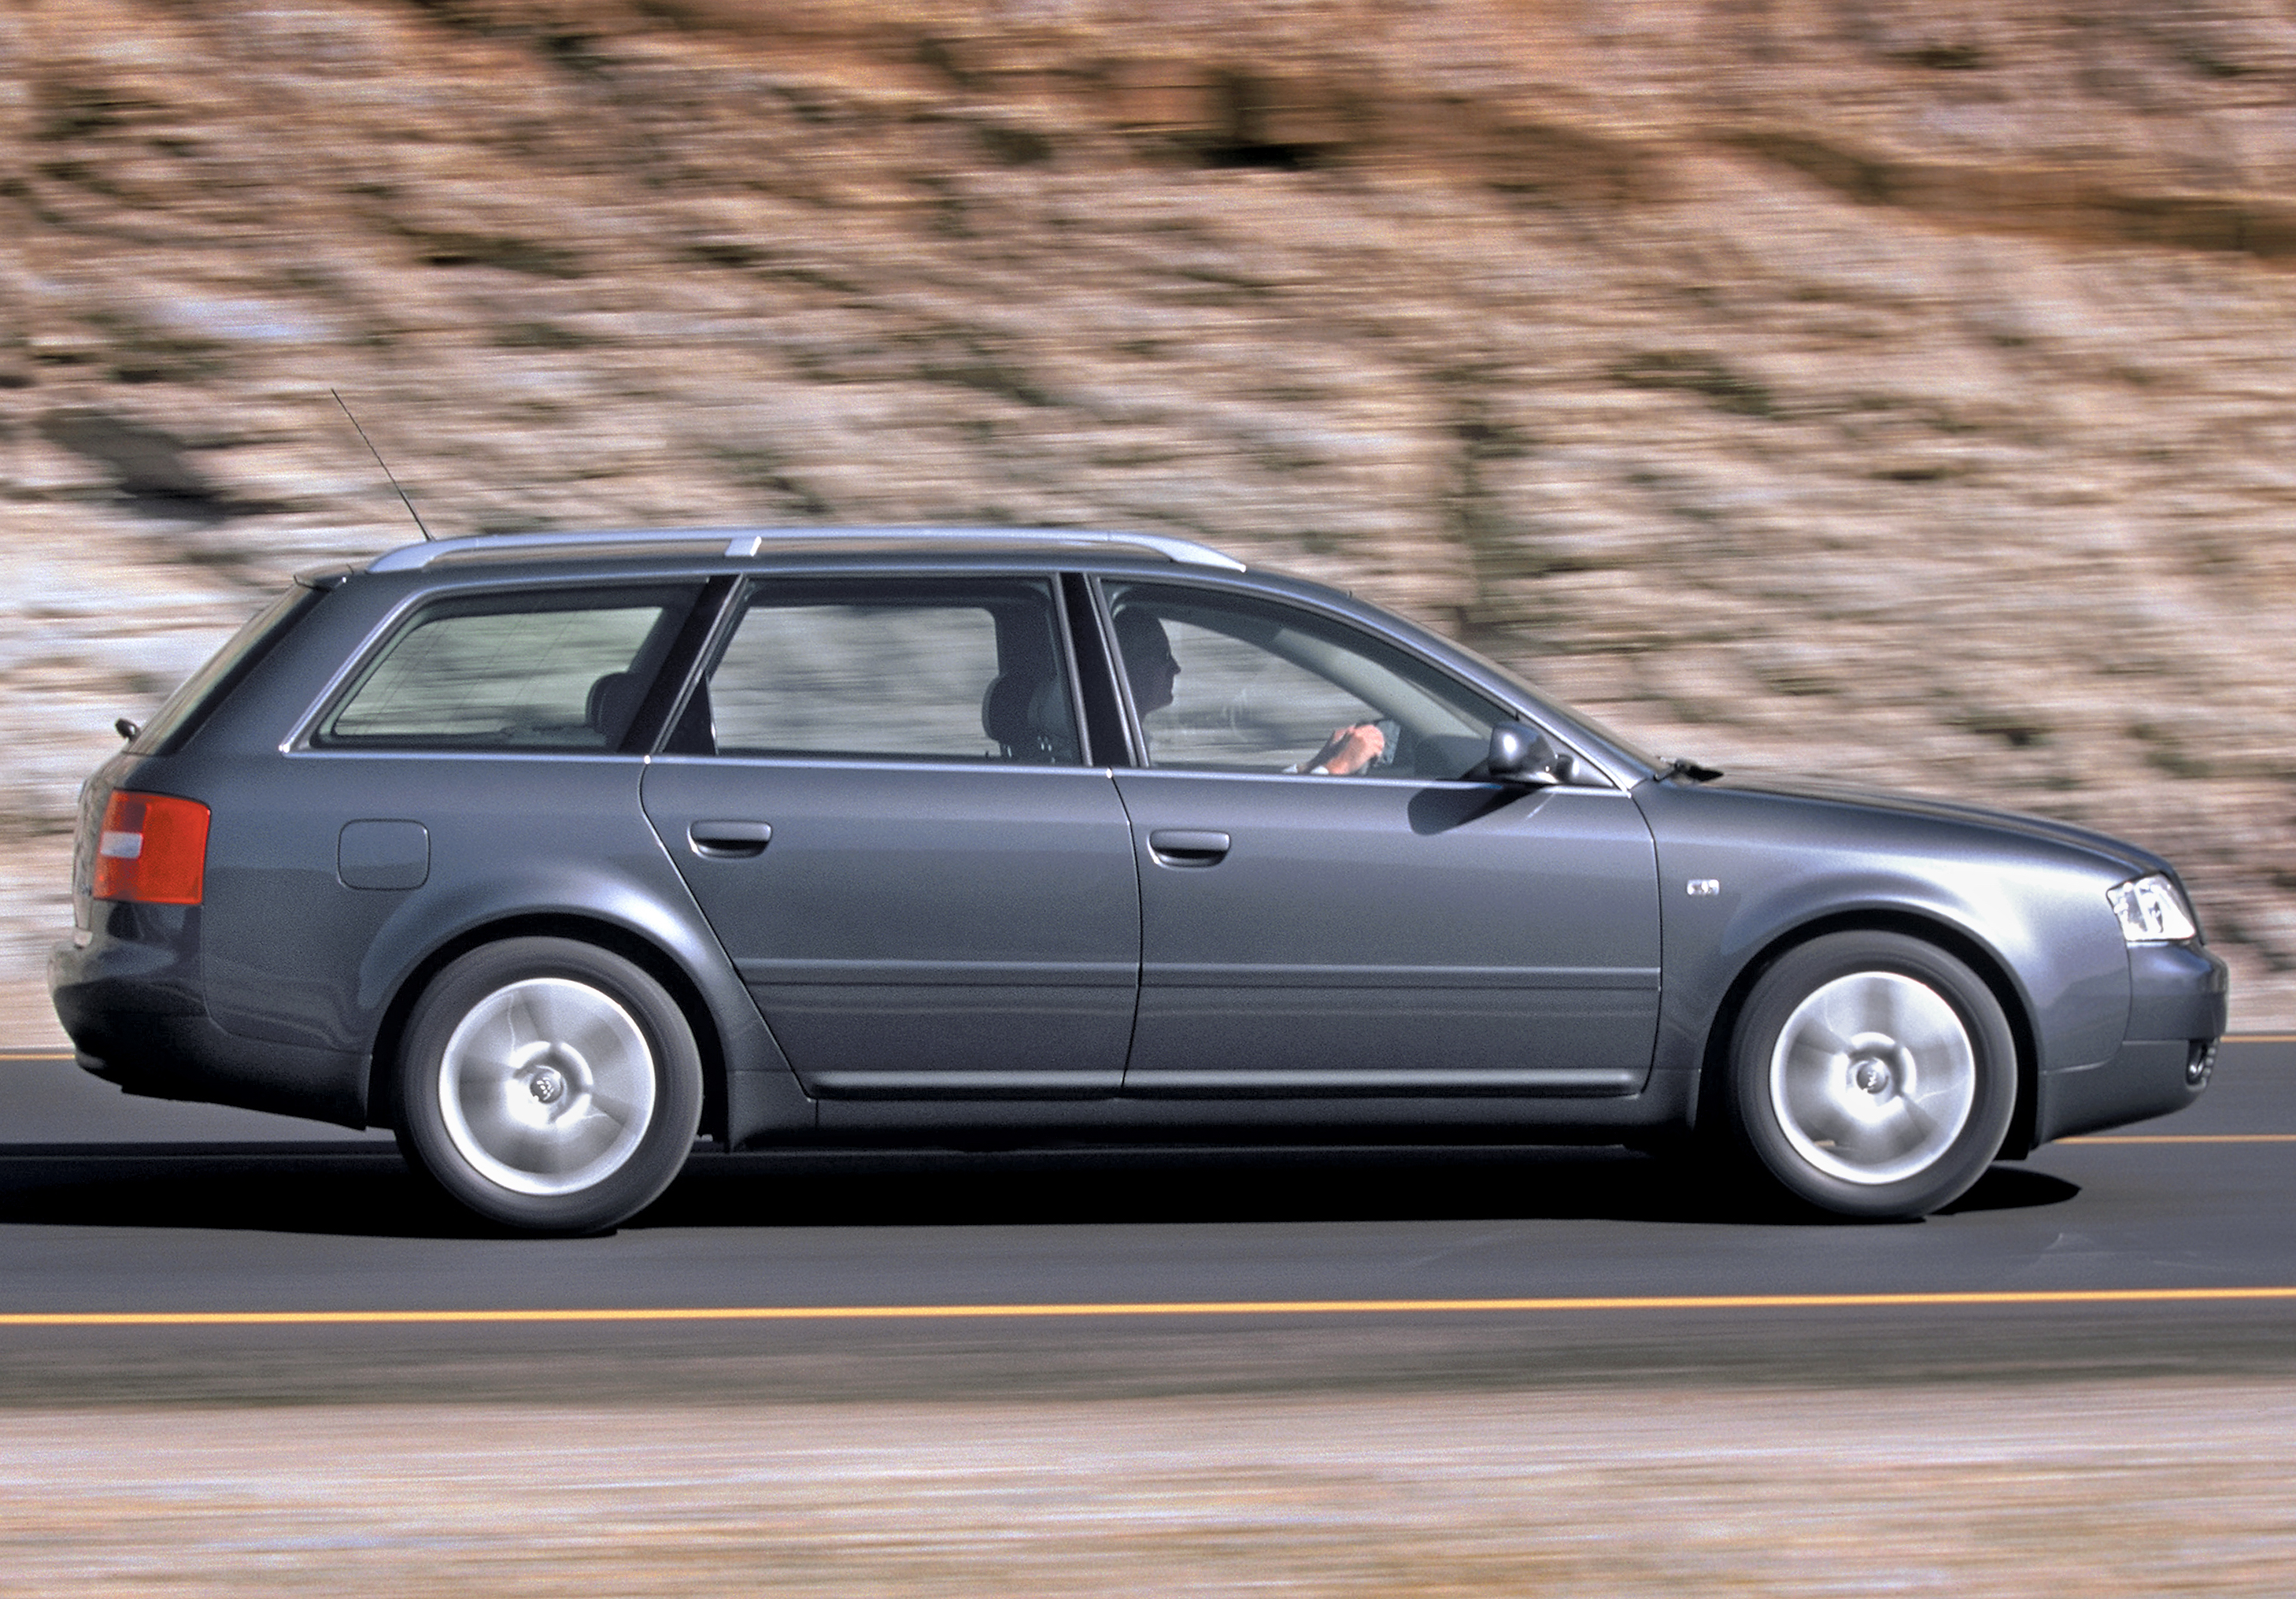 Audi's A6 Avant combines practicality and great build quality